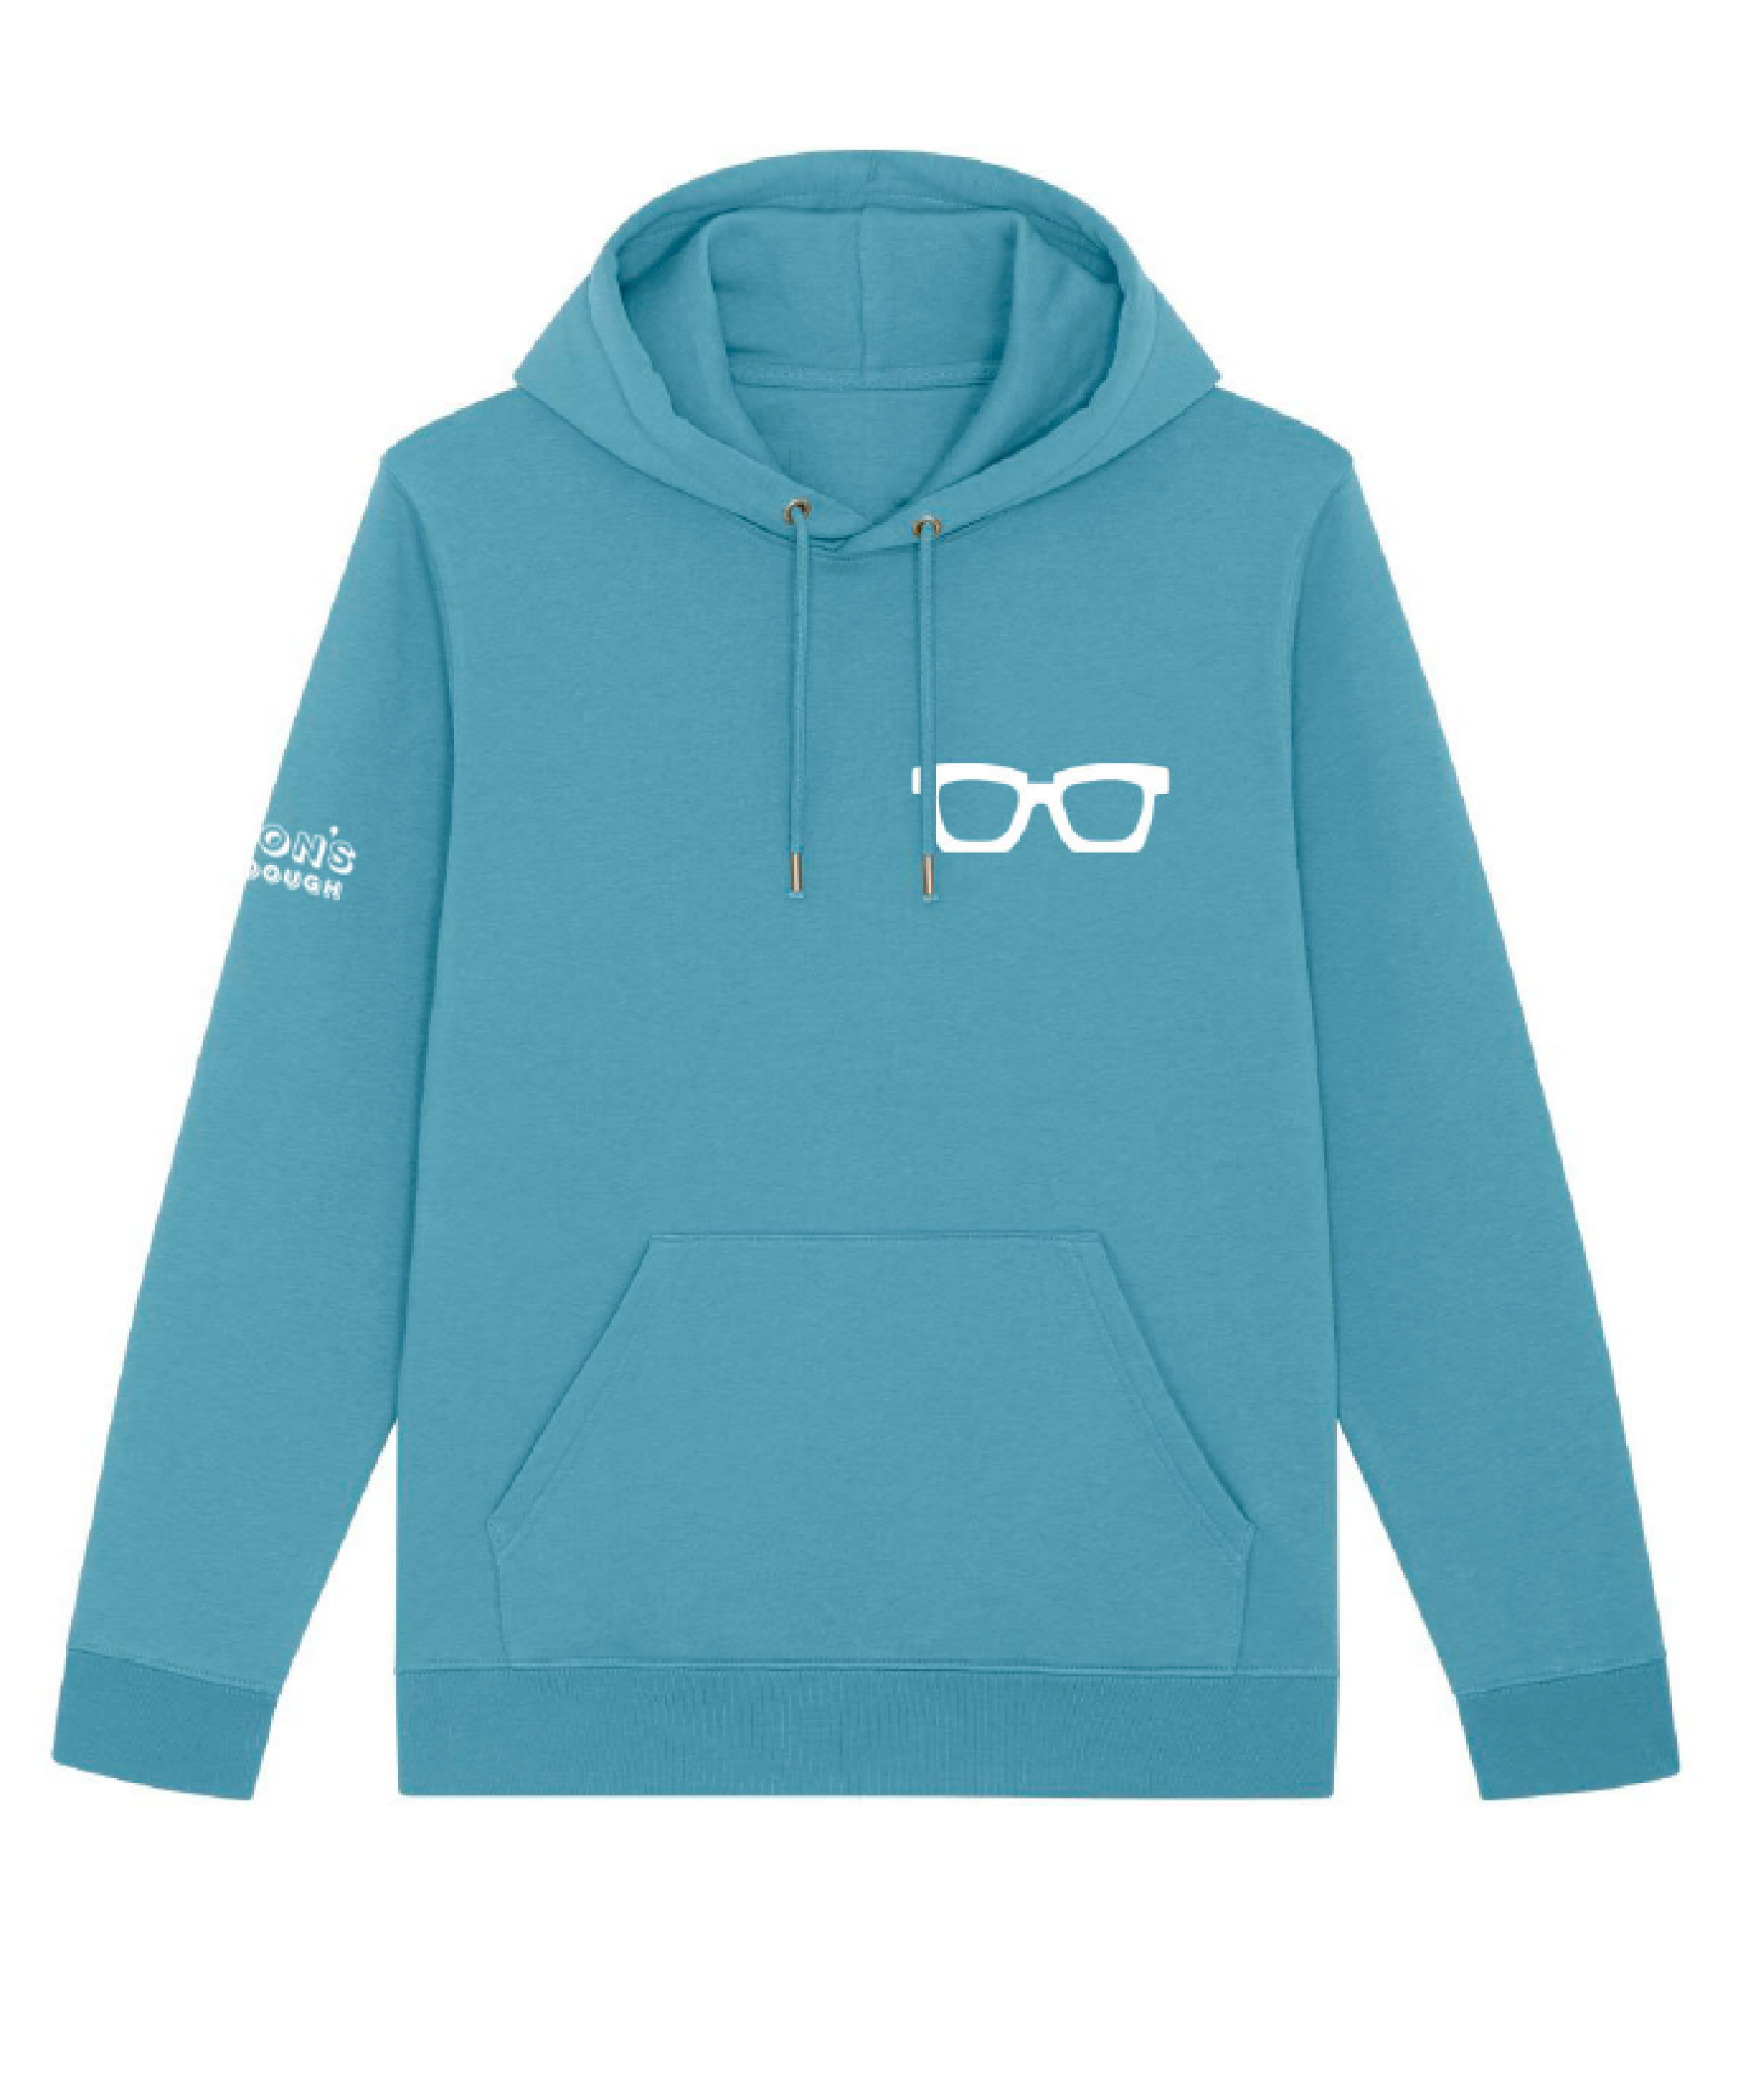 Blue hoodie Just Dough It front visual.png